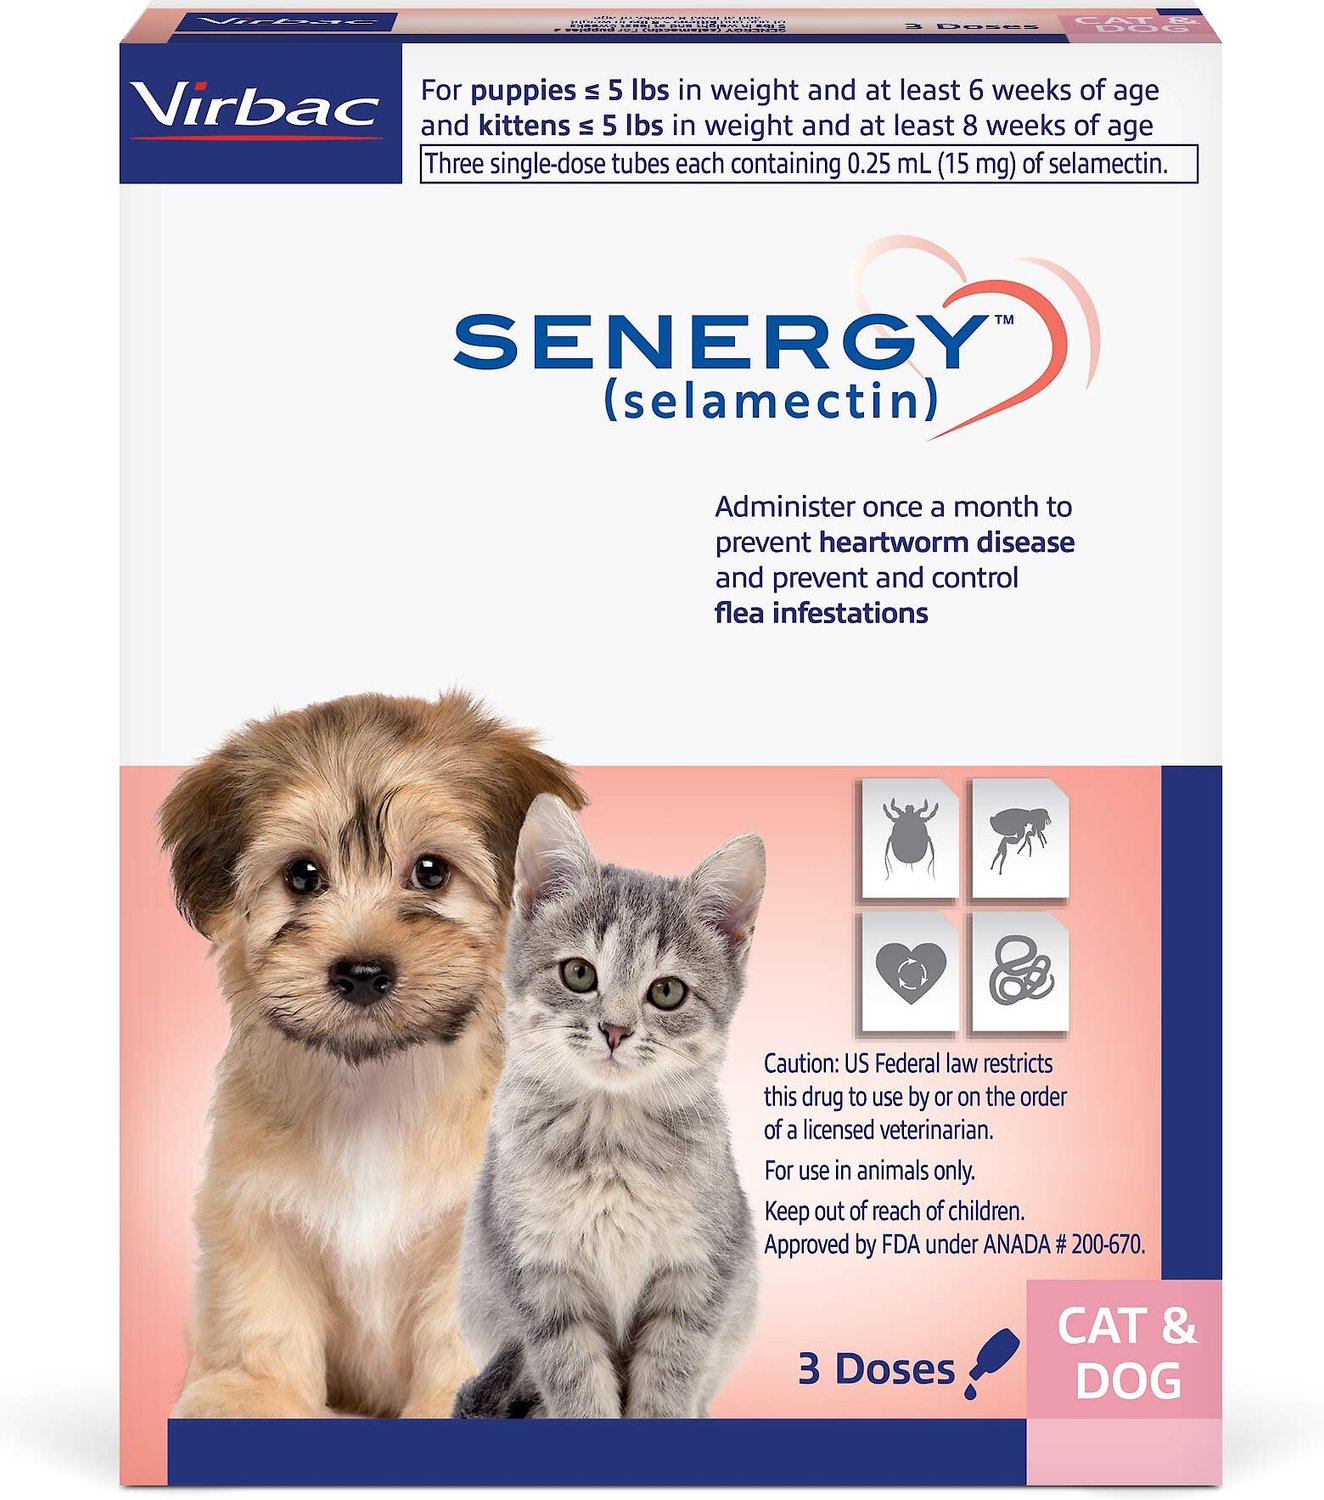 SENERGY Topical Solution for Puppies & Kittens, up to 5 lbs, (Mauve Box